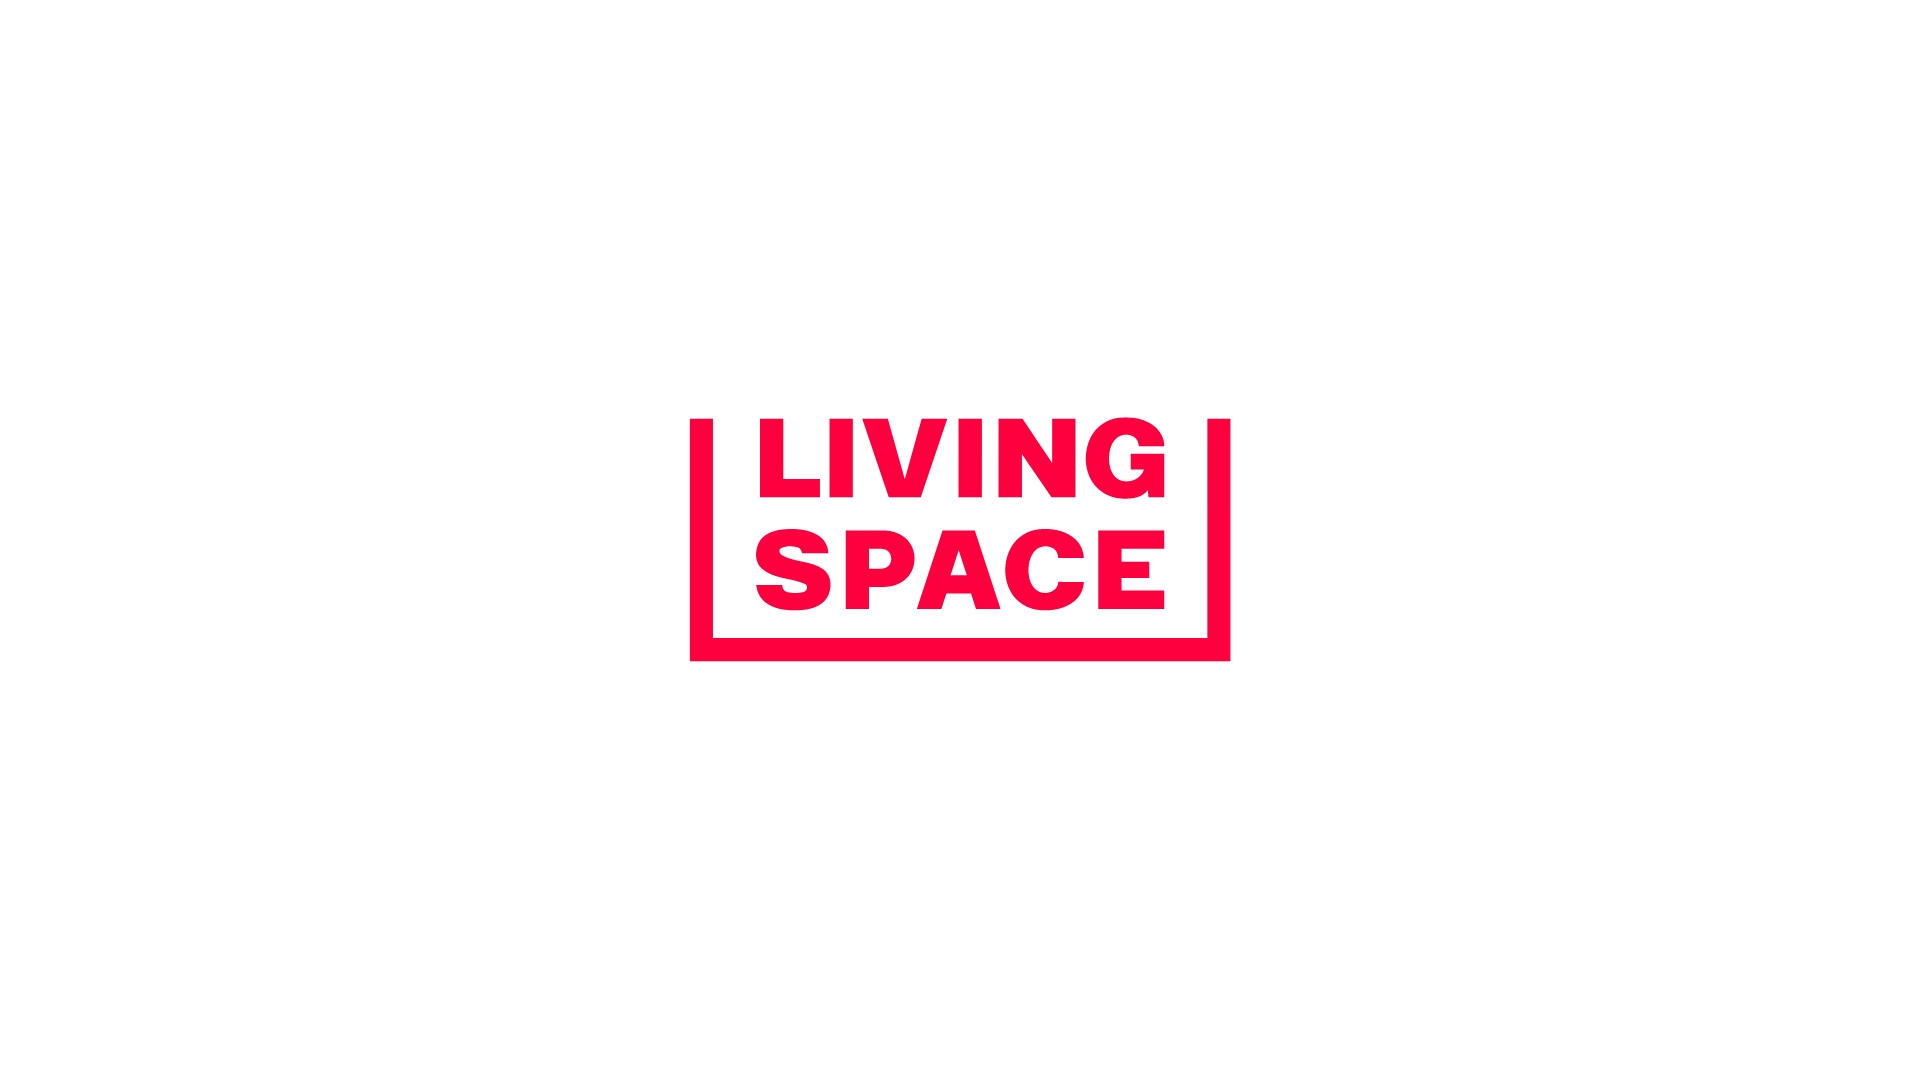 Timmins Care Text logo with the words "living space" inside a red rectangle on a white background. Cochrane District Social Services Administration Board